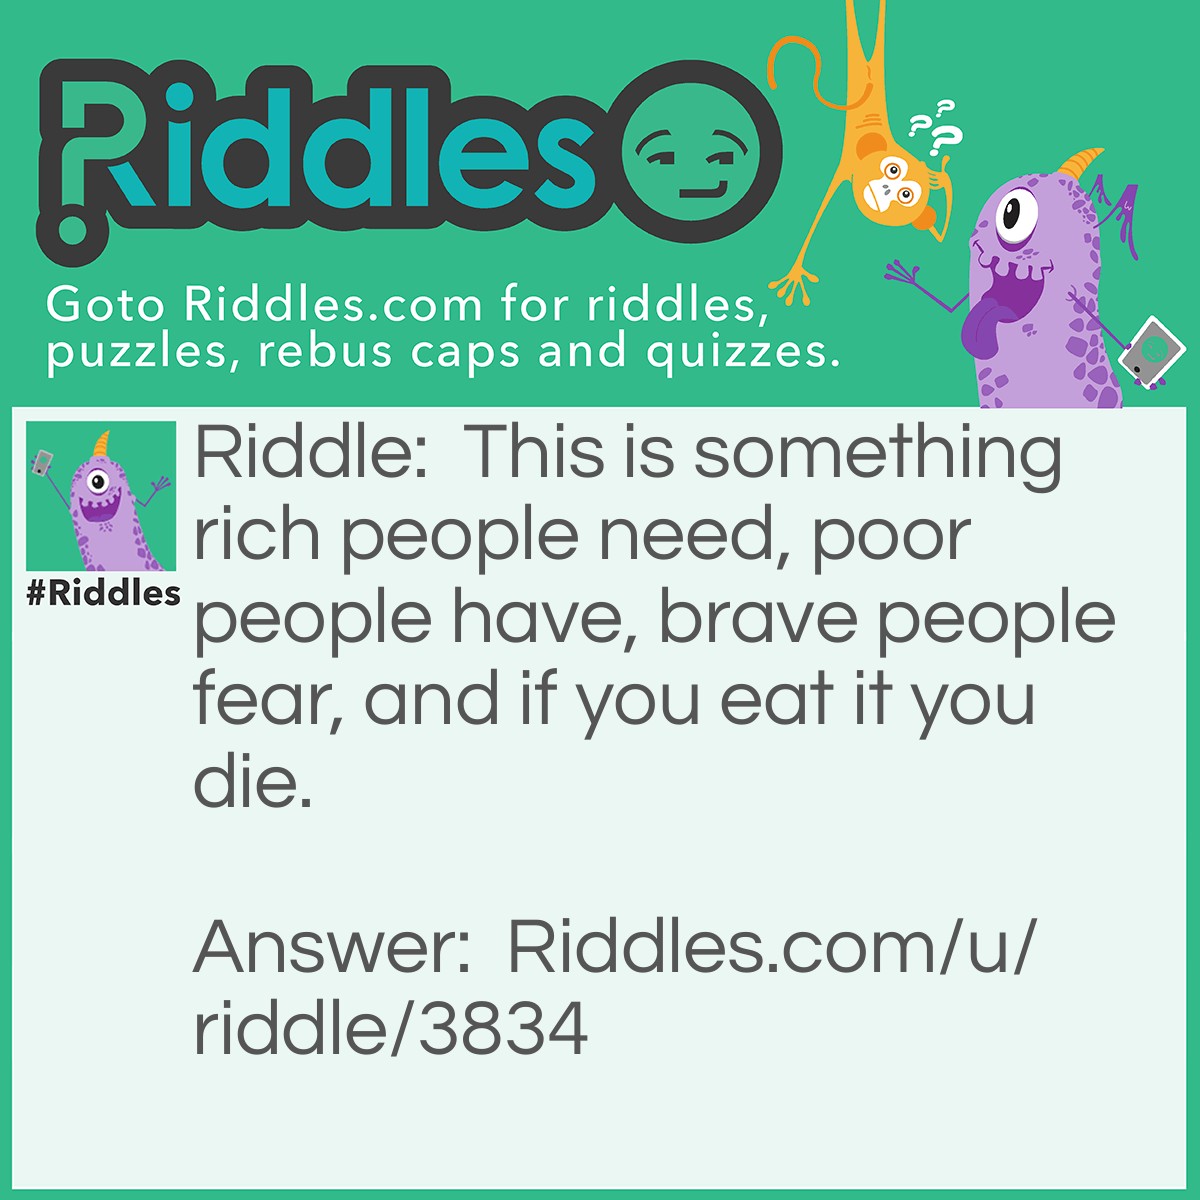 Riddle: This is something rich people need, poor people have, brave people fear, and if you eat it you die. Answer: Nothing. Rich people need NOTHING, poor people have NOTHING, brave people fear NOTHING, and if you eat NOTHING you die.